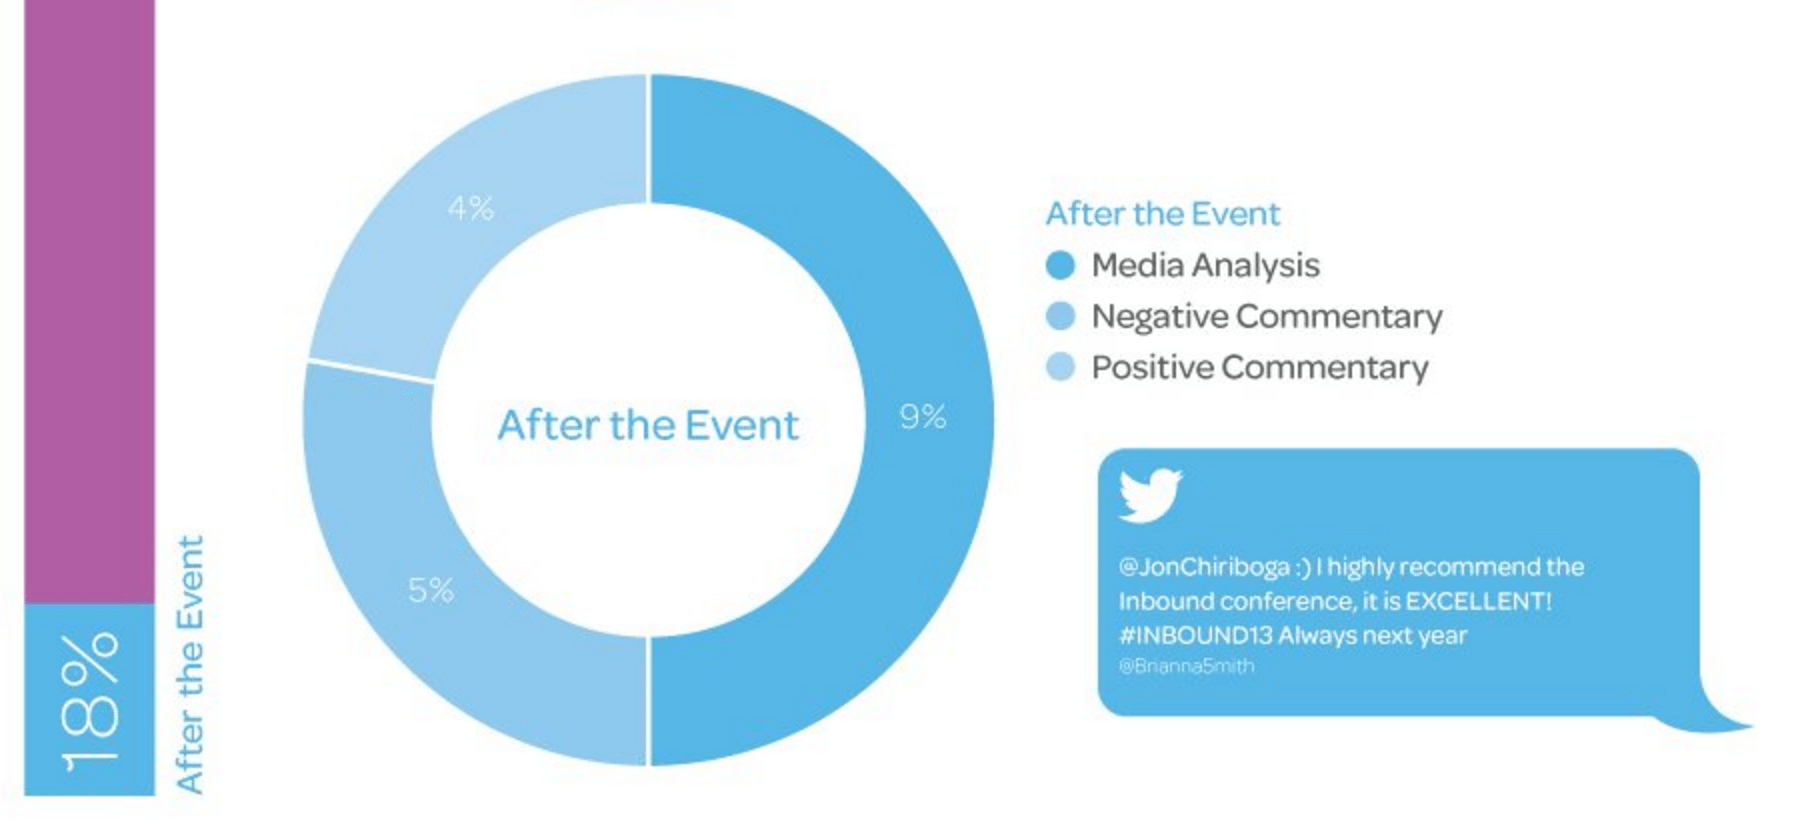 Social media event marketing - after the event